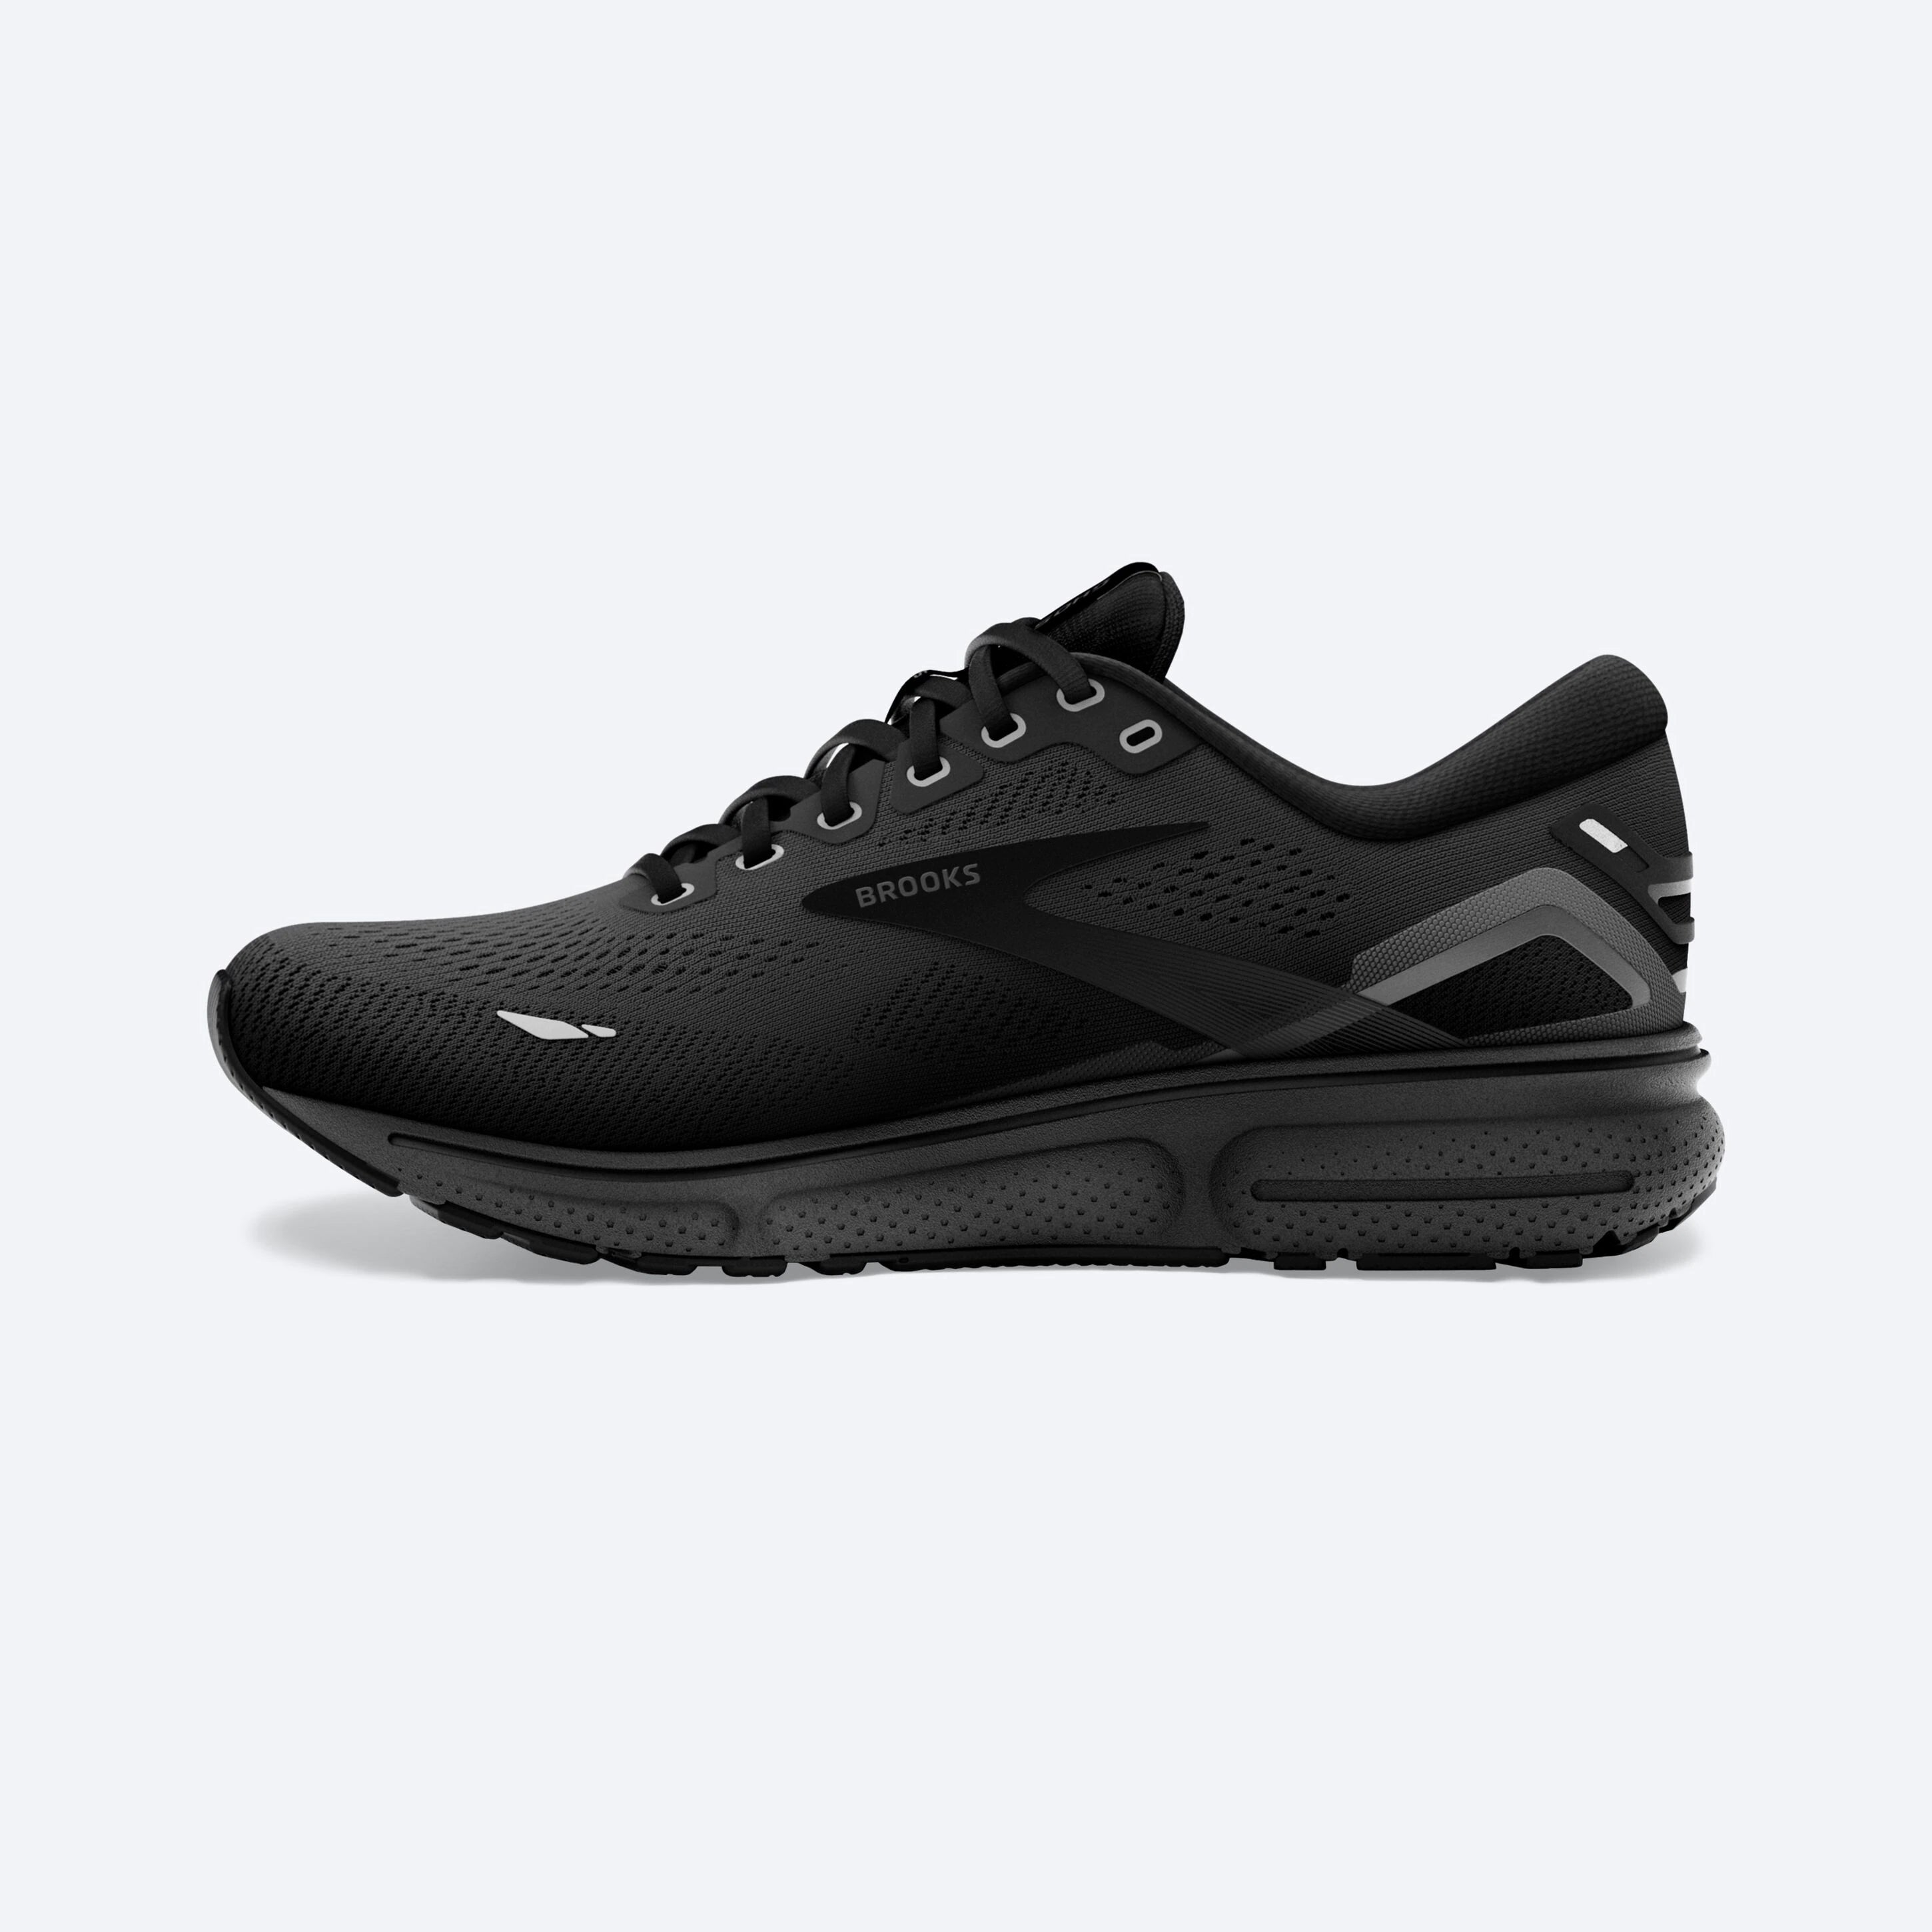 Medial view of the Women's Ghost 15 by Brooks in the color all black